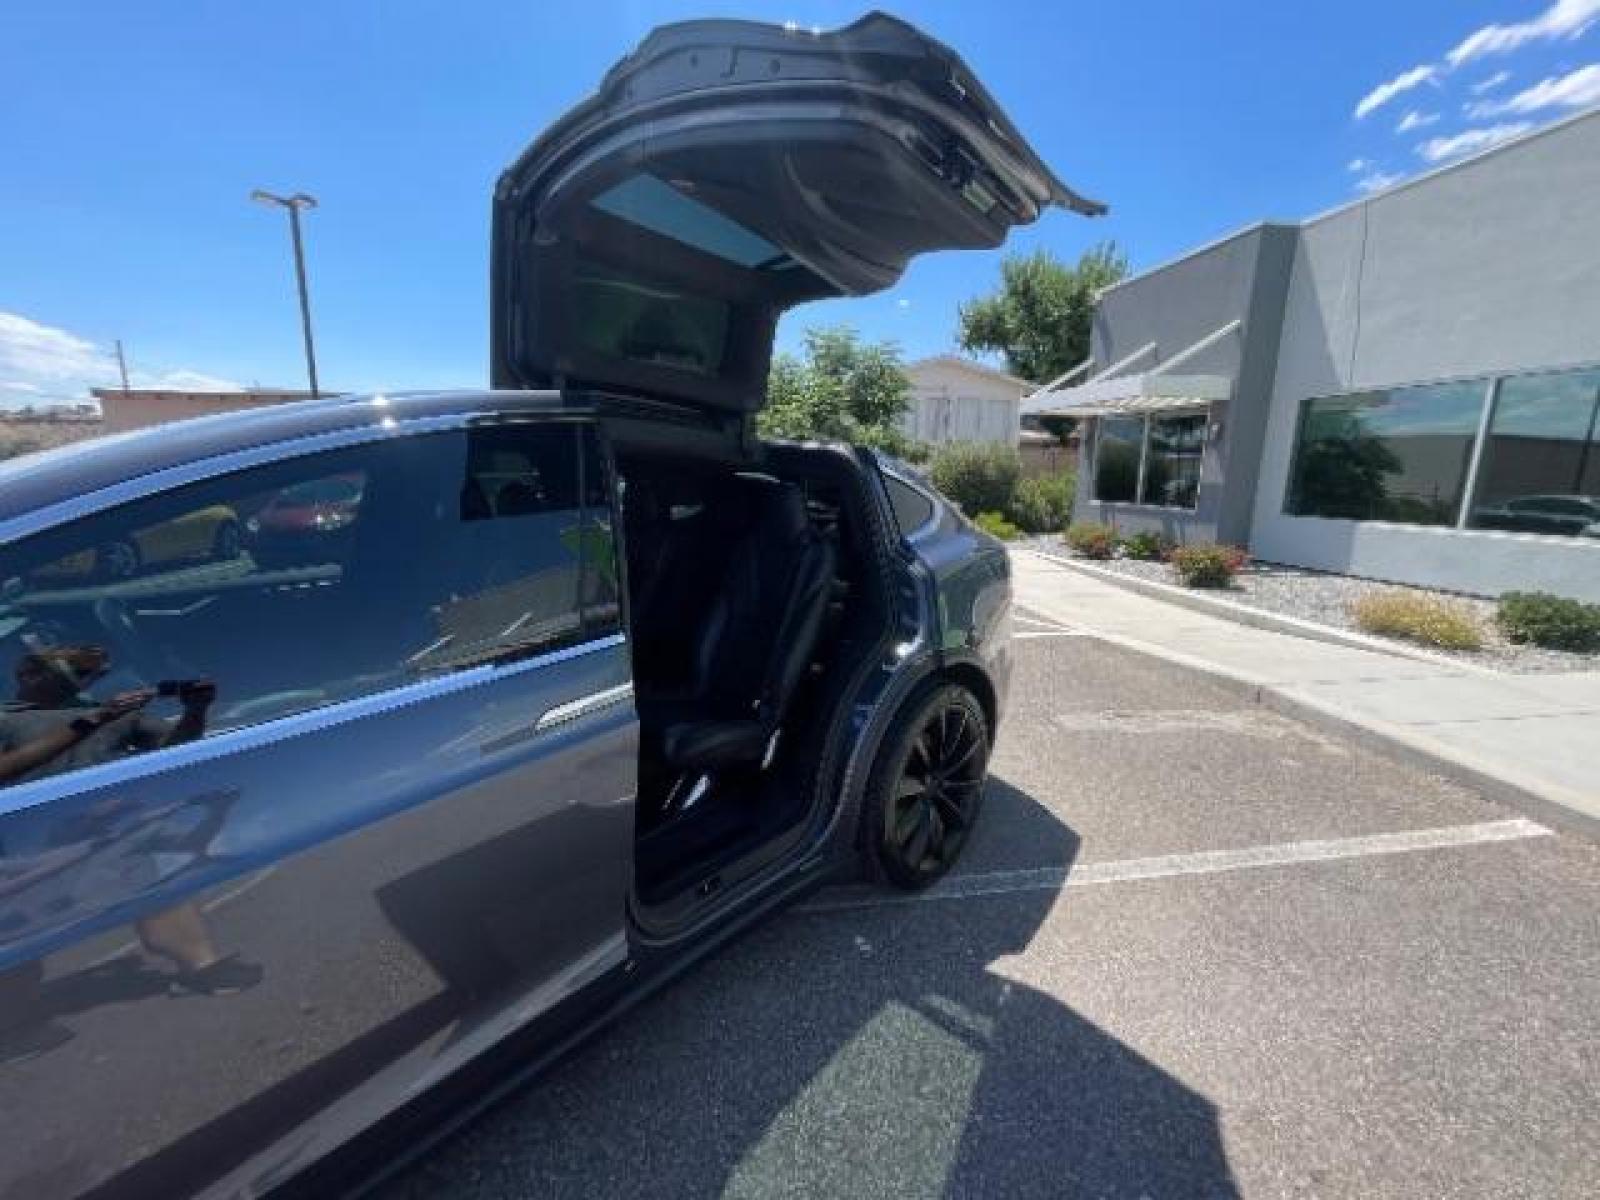 2020 Midnight Silver Metallic /All Black, leatherette Tesla Model X Performance (5YJXCBE45LF) with an ELECTRIC engine, 1-Speed Automatic transmission, located at 1865 East Red Hills Pkwy, St. George, 84770, (435) 628-0023, 37.120850, -113.543640 - 6 Seats, Ludicrous mode, 0-60mph in under 3 seconds, CLEAN TITLE, 1 Owner, Tow hitch, CCS adapter installed, Homelink, Low Miles, Great condition, New tires, Full self driving capable computer. Bumper 2 bumper warranty until Feb-2024, Motor and Battery warranty until Feb-2028. Call or text for m - Photo #16